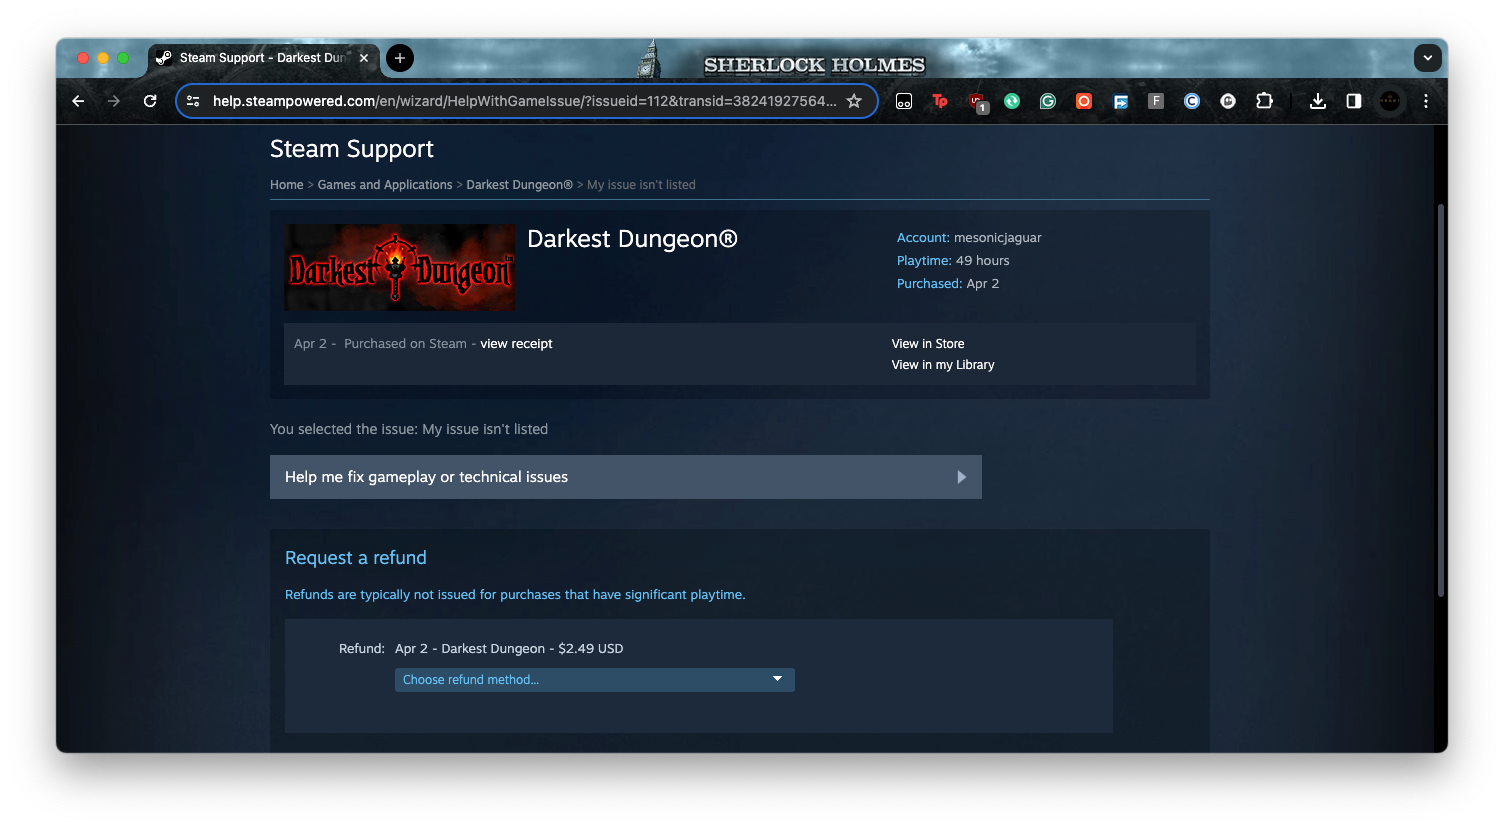 Steam Support's refund option on the web